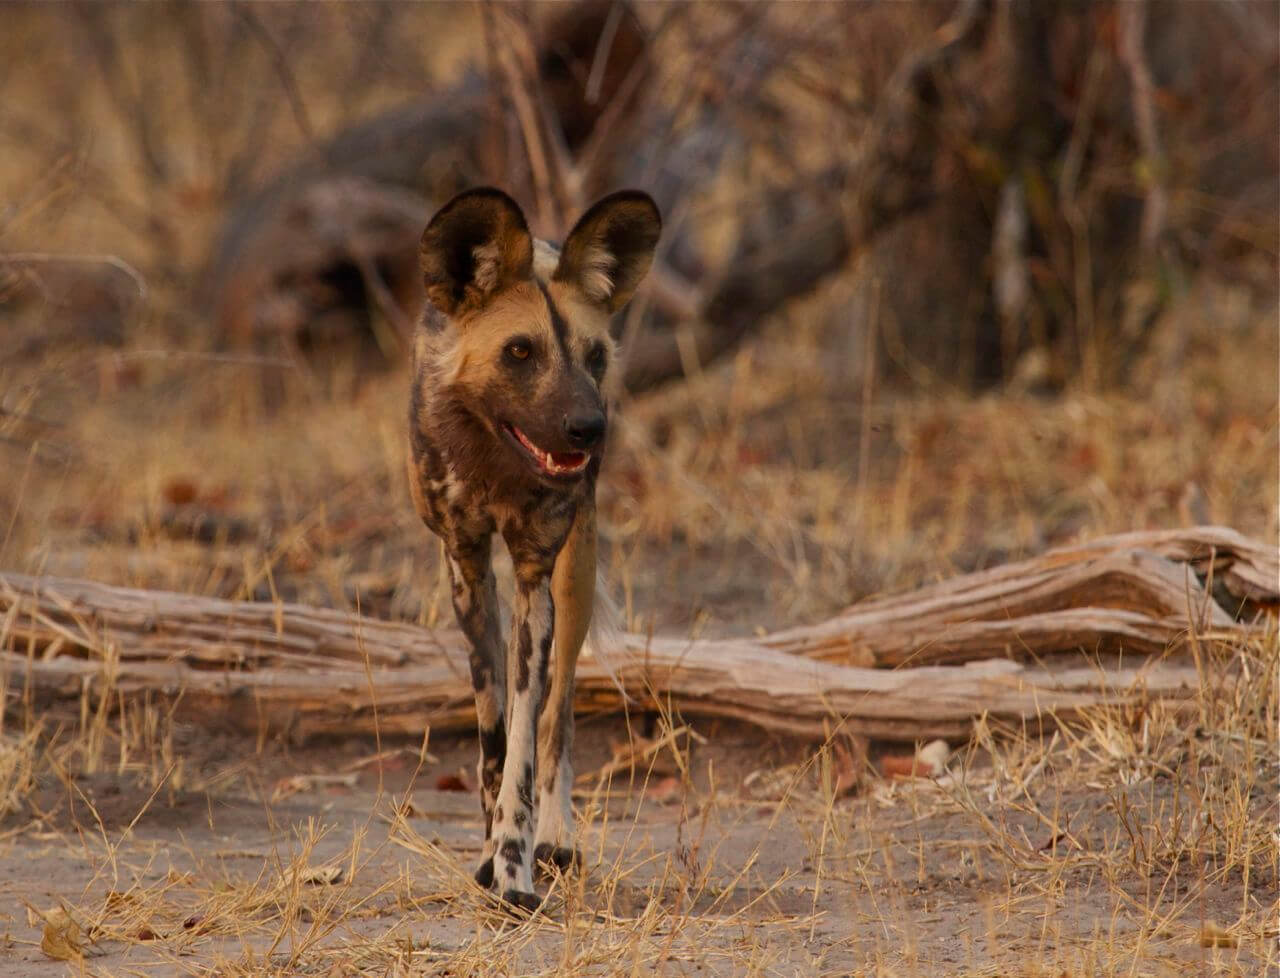 Botswana is one of the best places to find the endangered African wild dog. This one seen with its pack in the Linyanti in northern Botswana